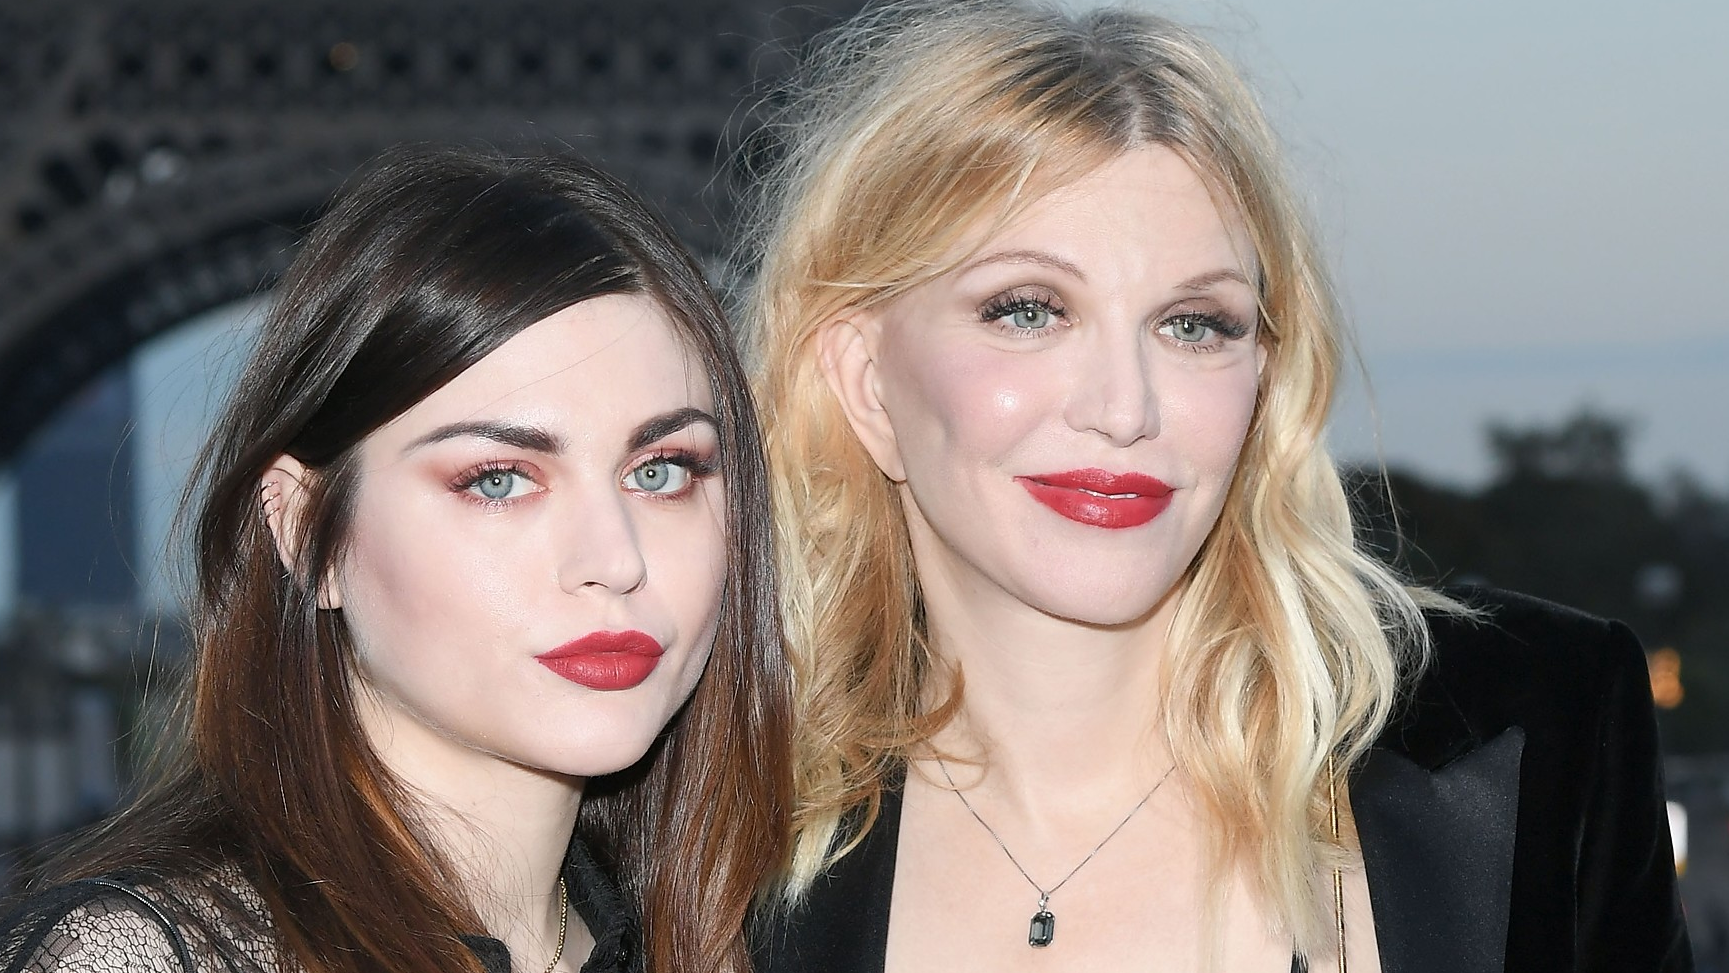 Courtney Love, Frances Bean Cobain and Dave Grohl Headed To Trial in Nirvana Legal Battle